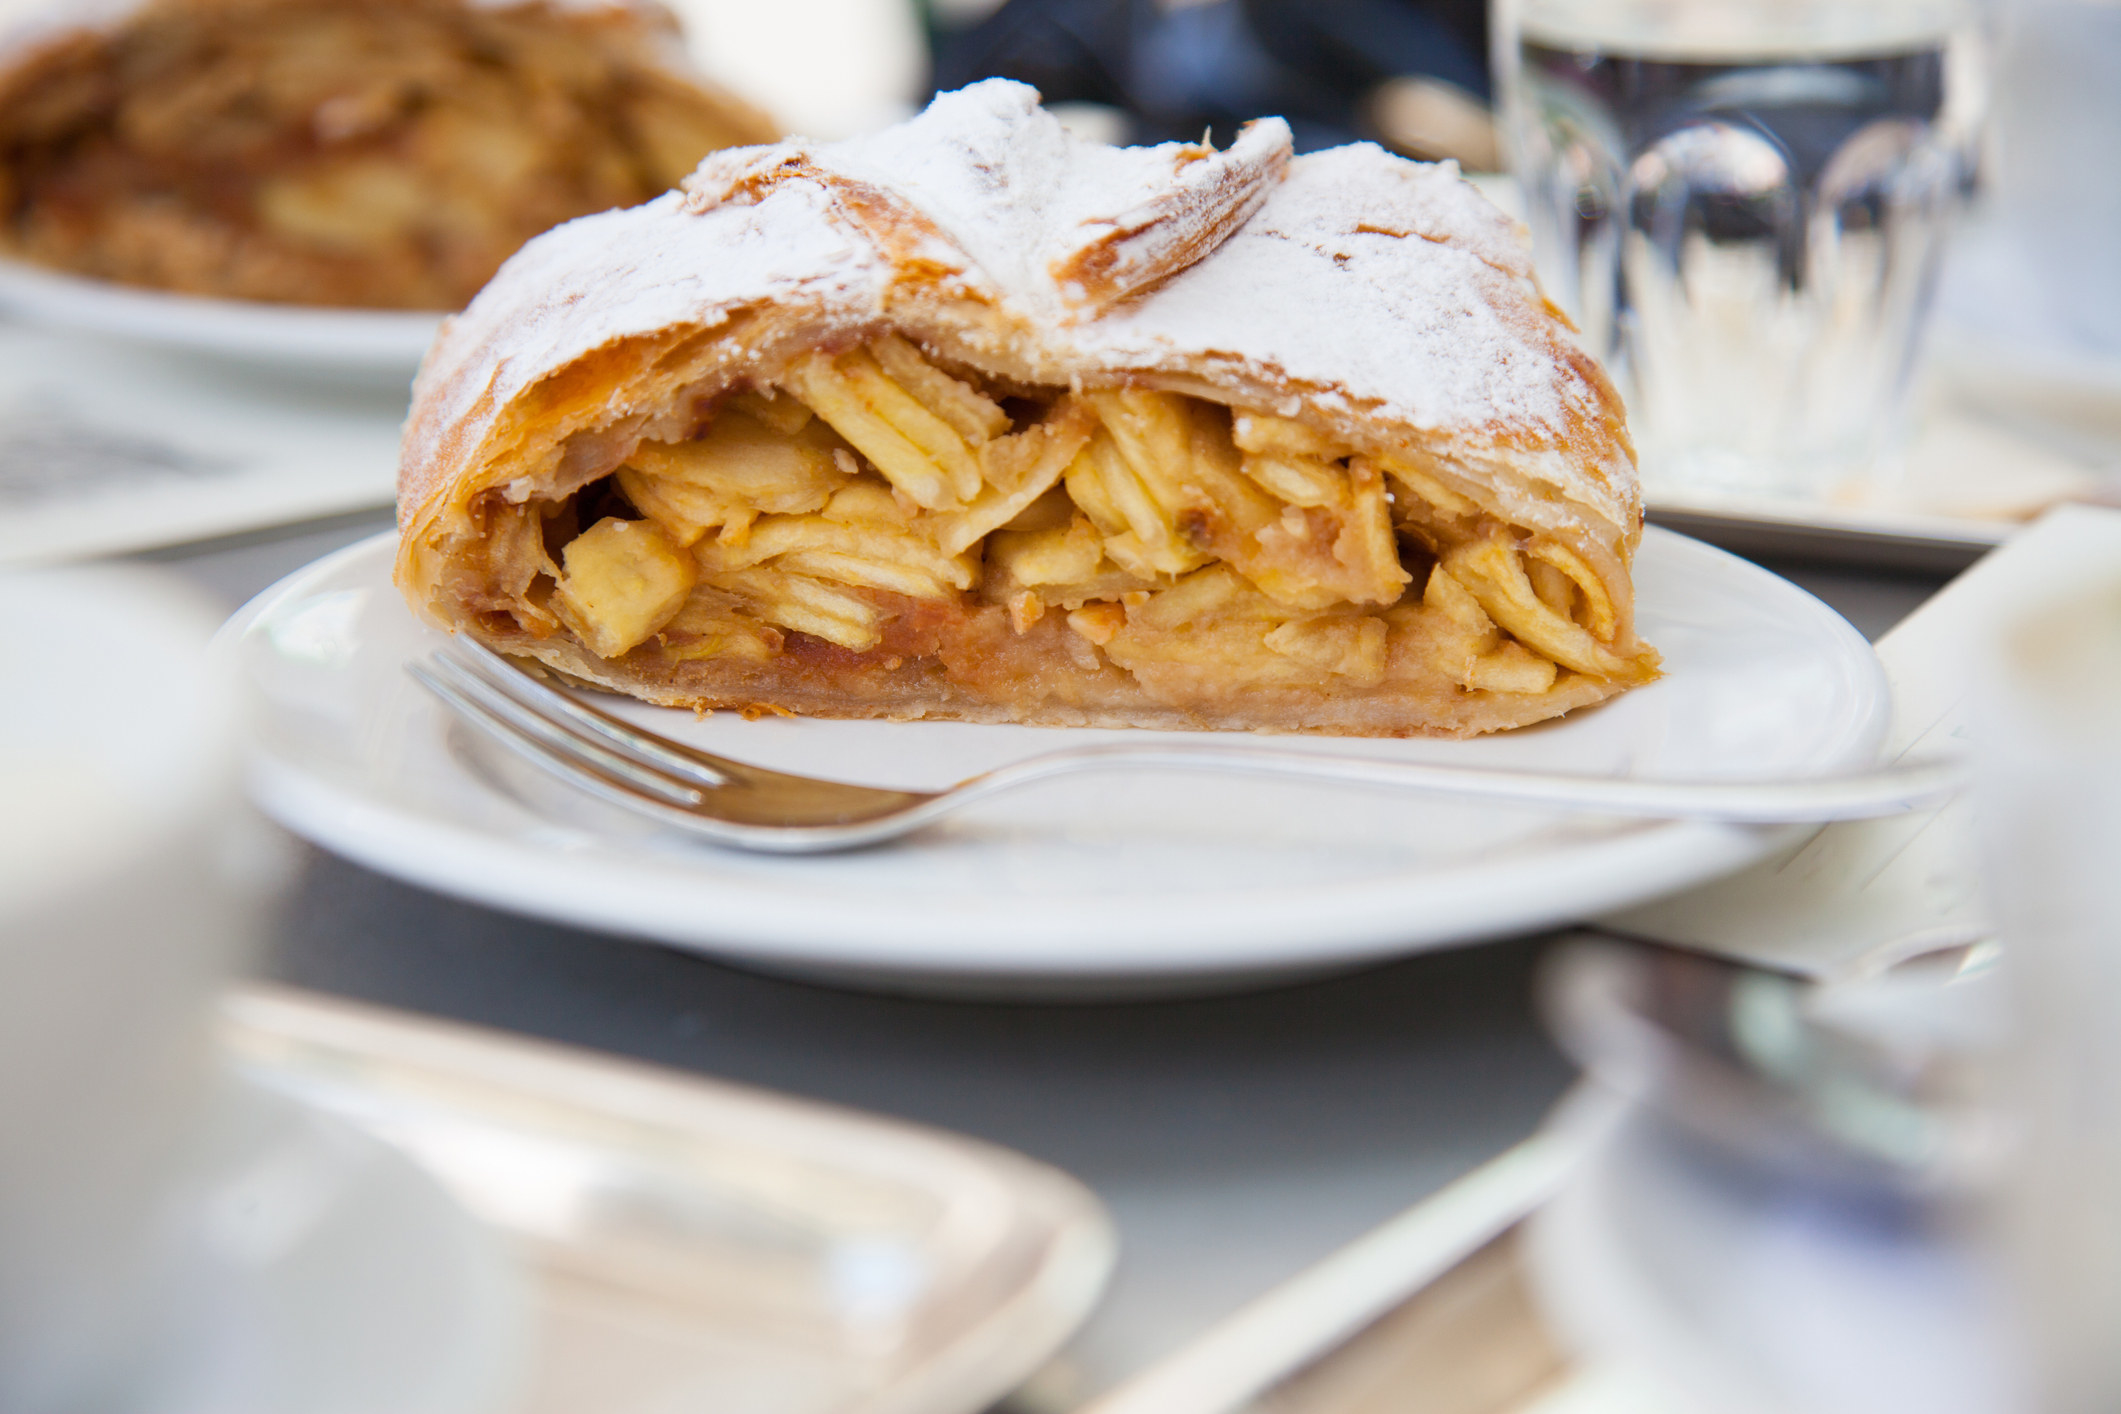 a slice of apple strudel with a golden-brown pastry and thin slices of apple inside